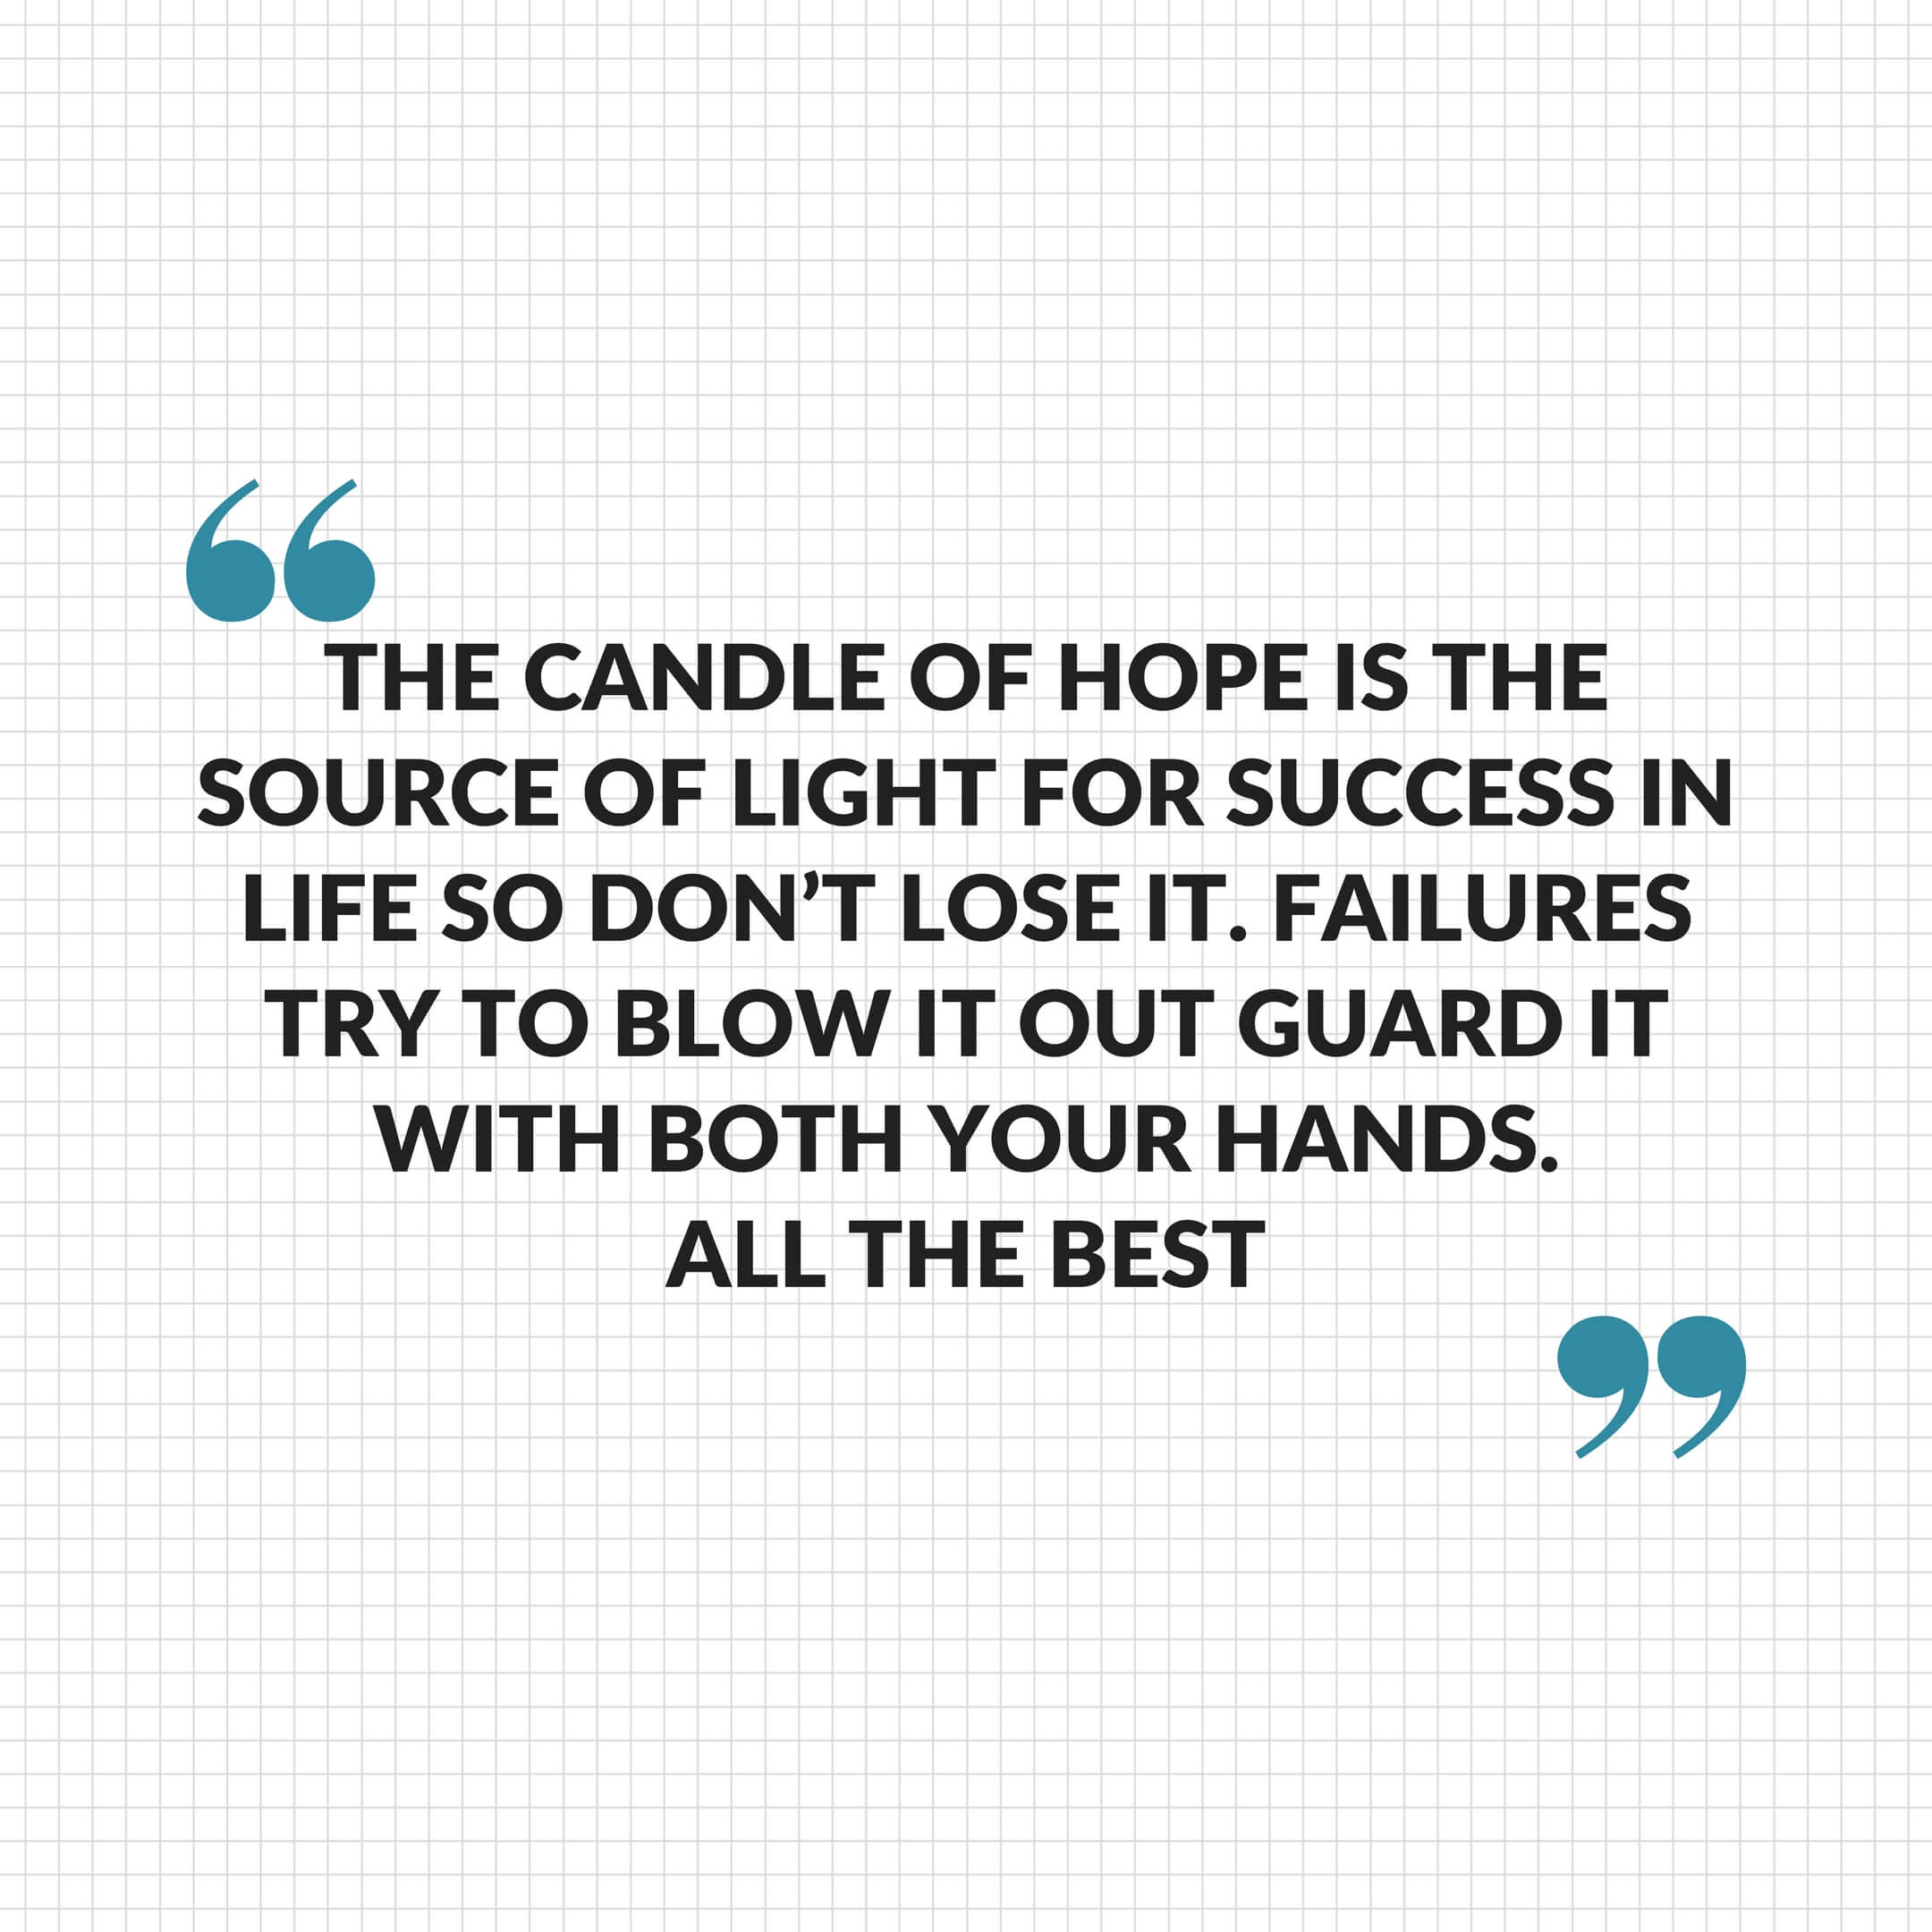 The candle of hope is The source of light for success in life So don't loose it. Failures try to blow it out Guard it with both your hands. All the Best! - Best Of Luck Quotes